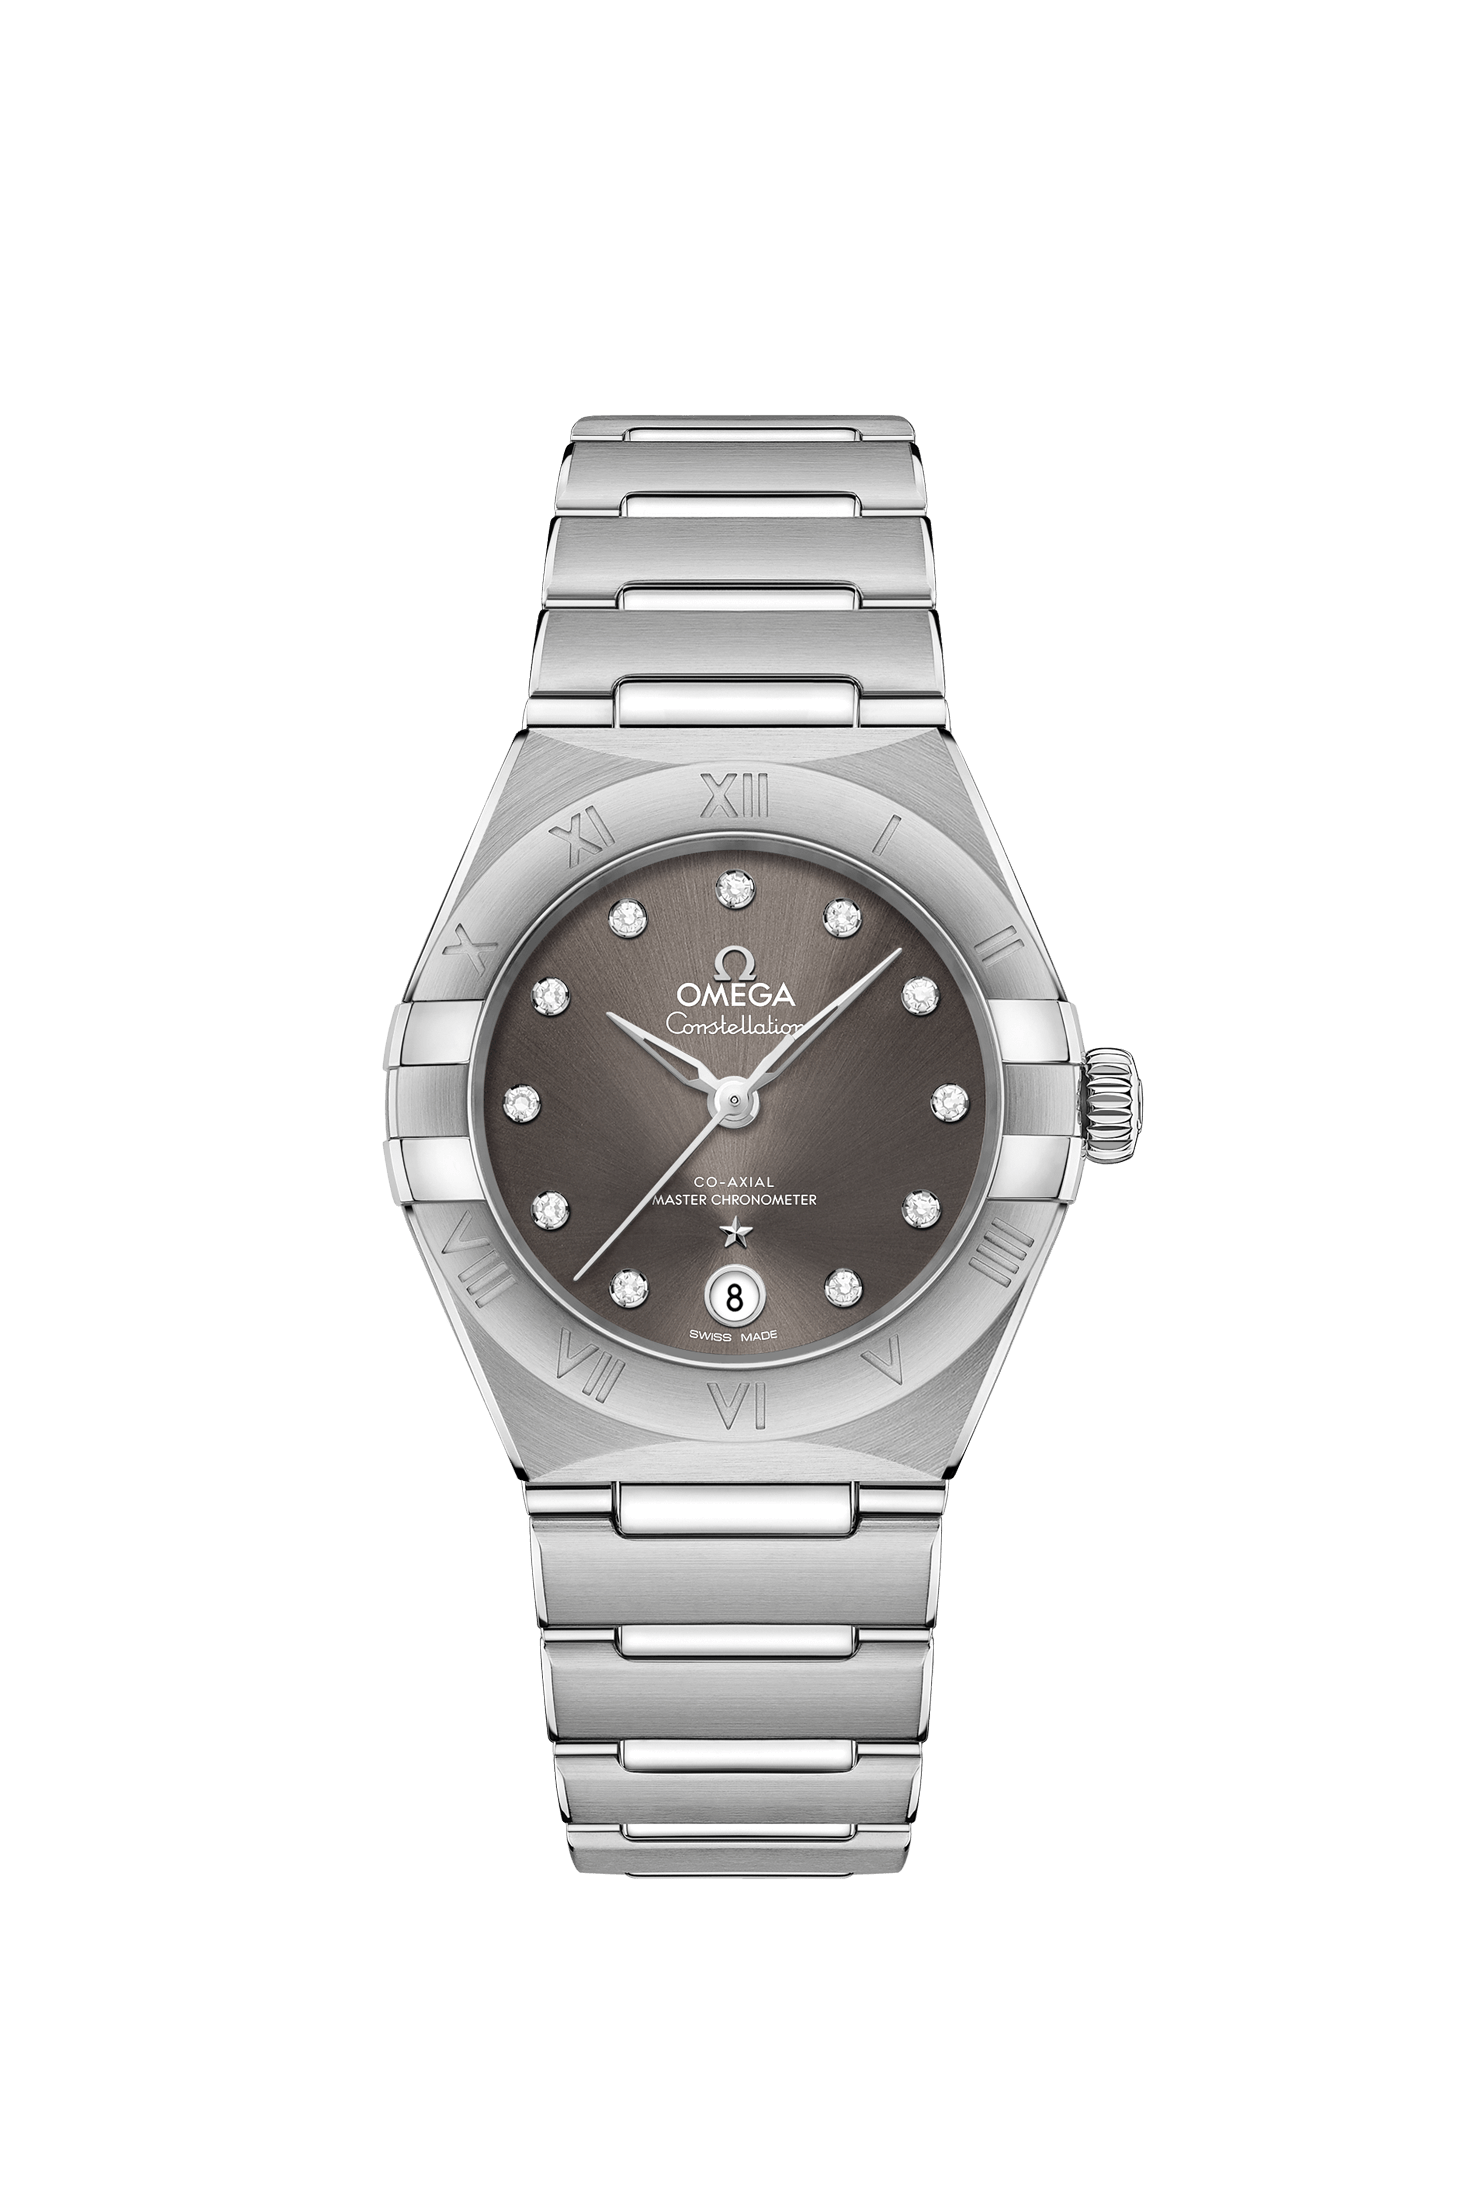 Ladies' watch  OMEGA, Constellation Co Axial Master Chronometer / 29mm, SKU: 131.10.29.20.56.001 | watchphilosophy.co.uk